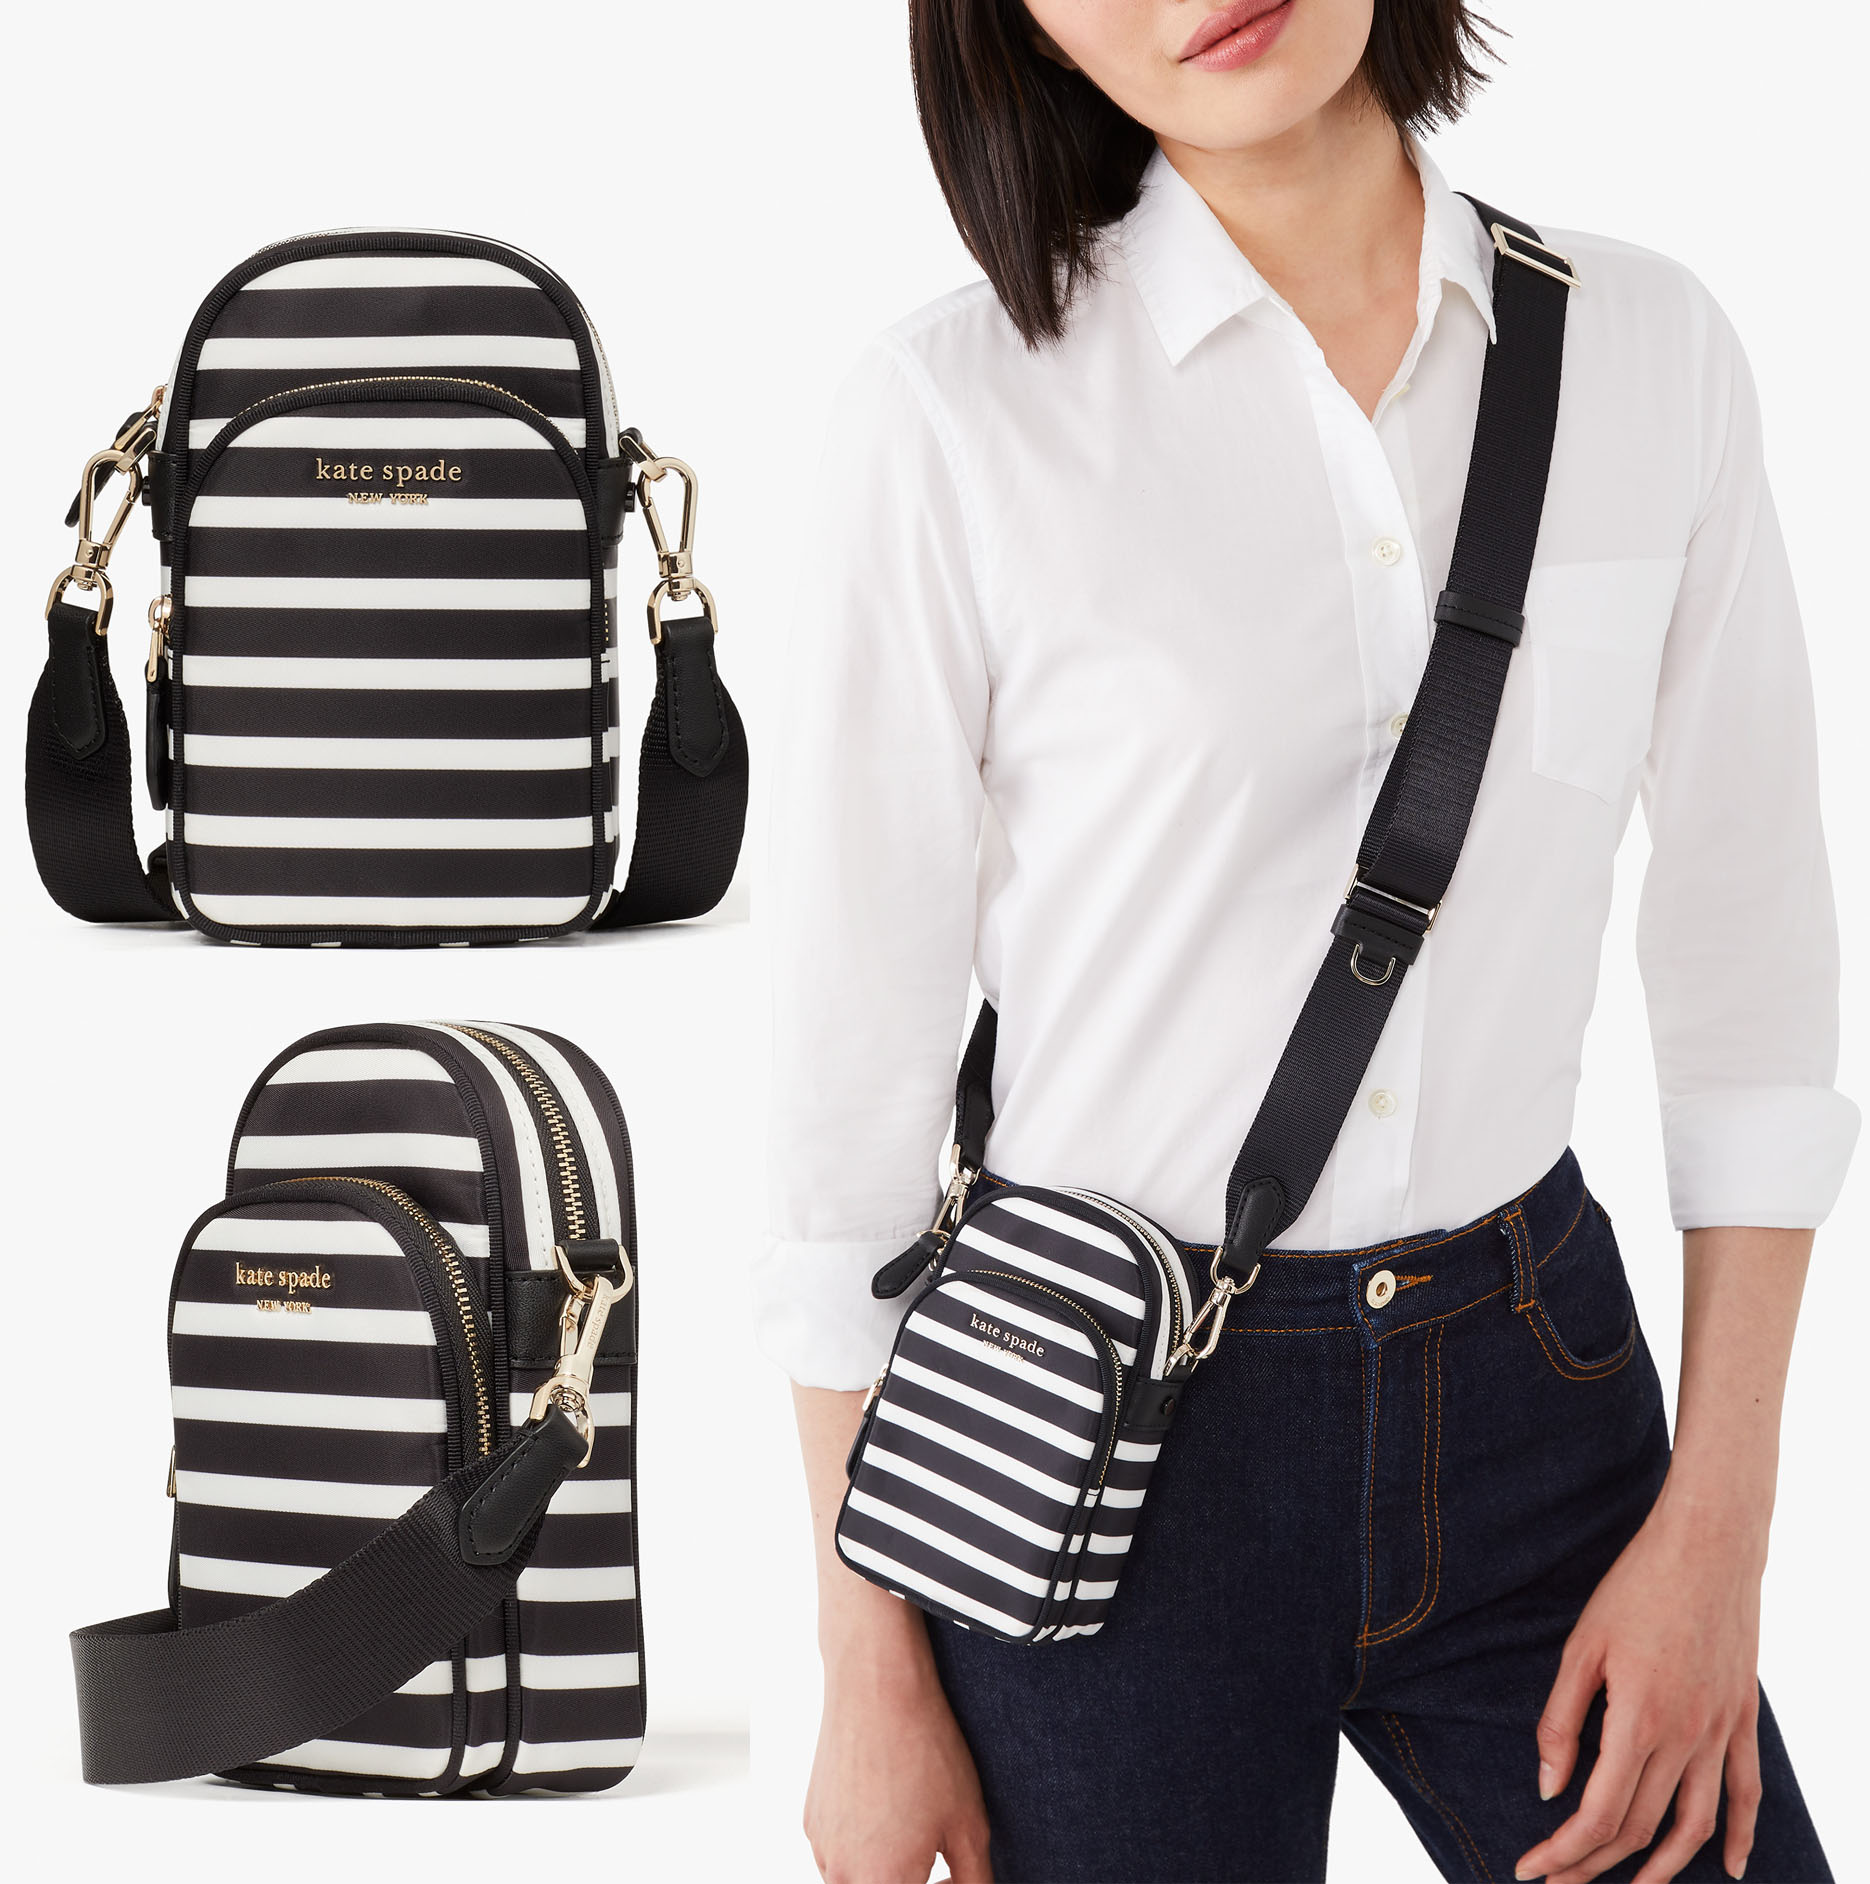 Functional and durable, Kate Spade's Little Better Sam features a striped design made from woven polyester